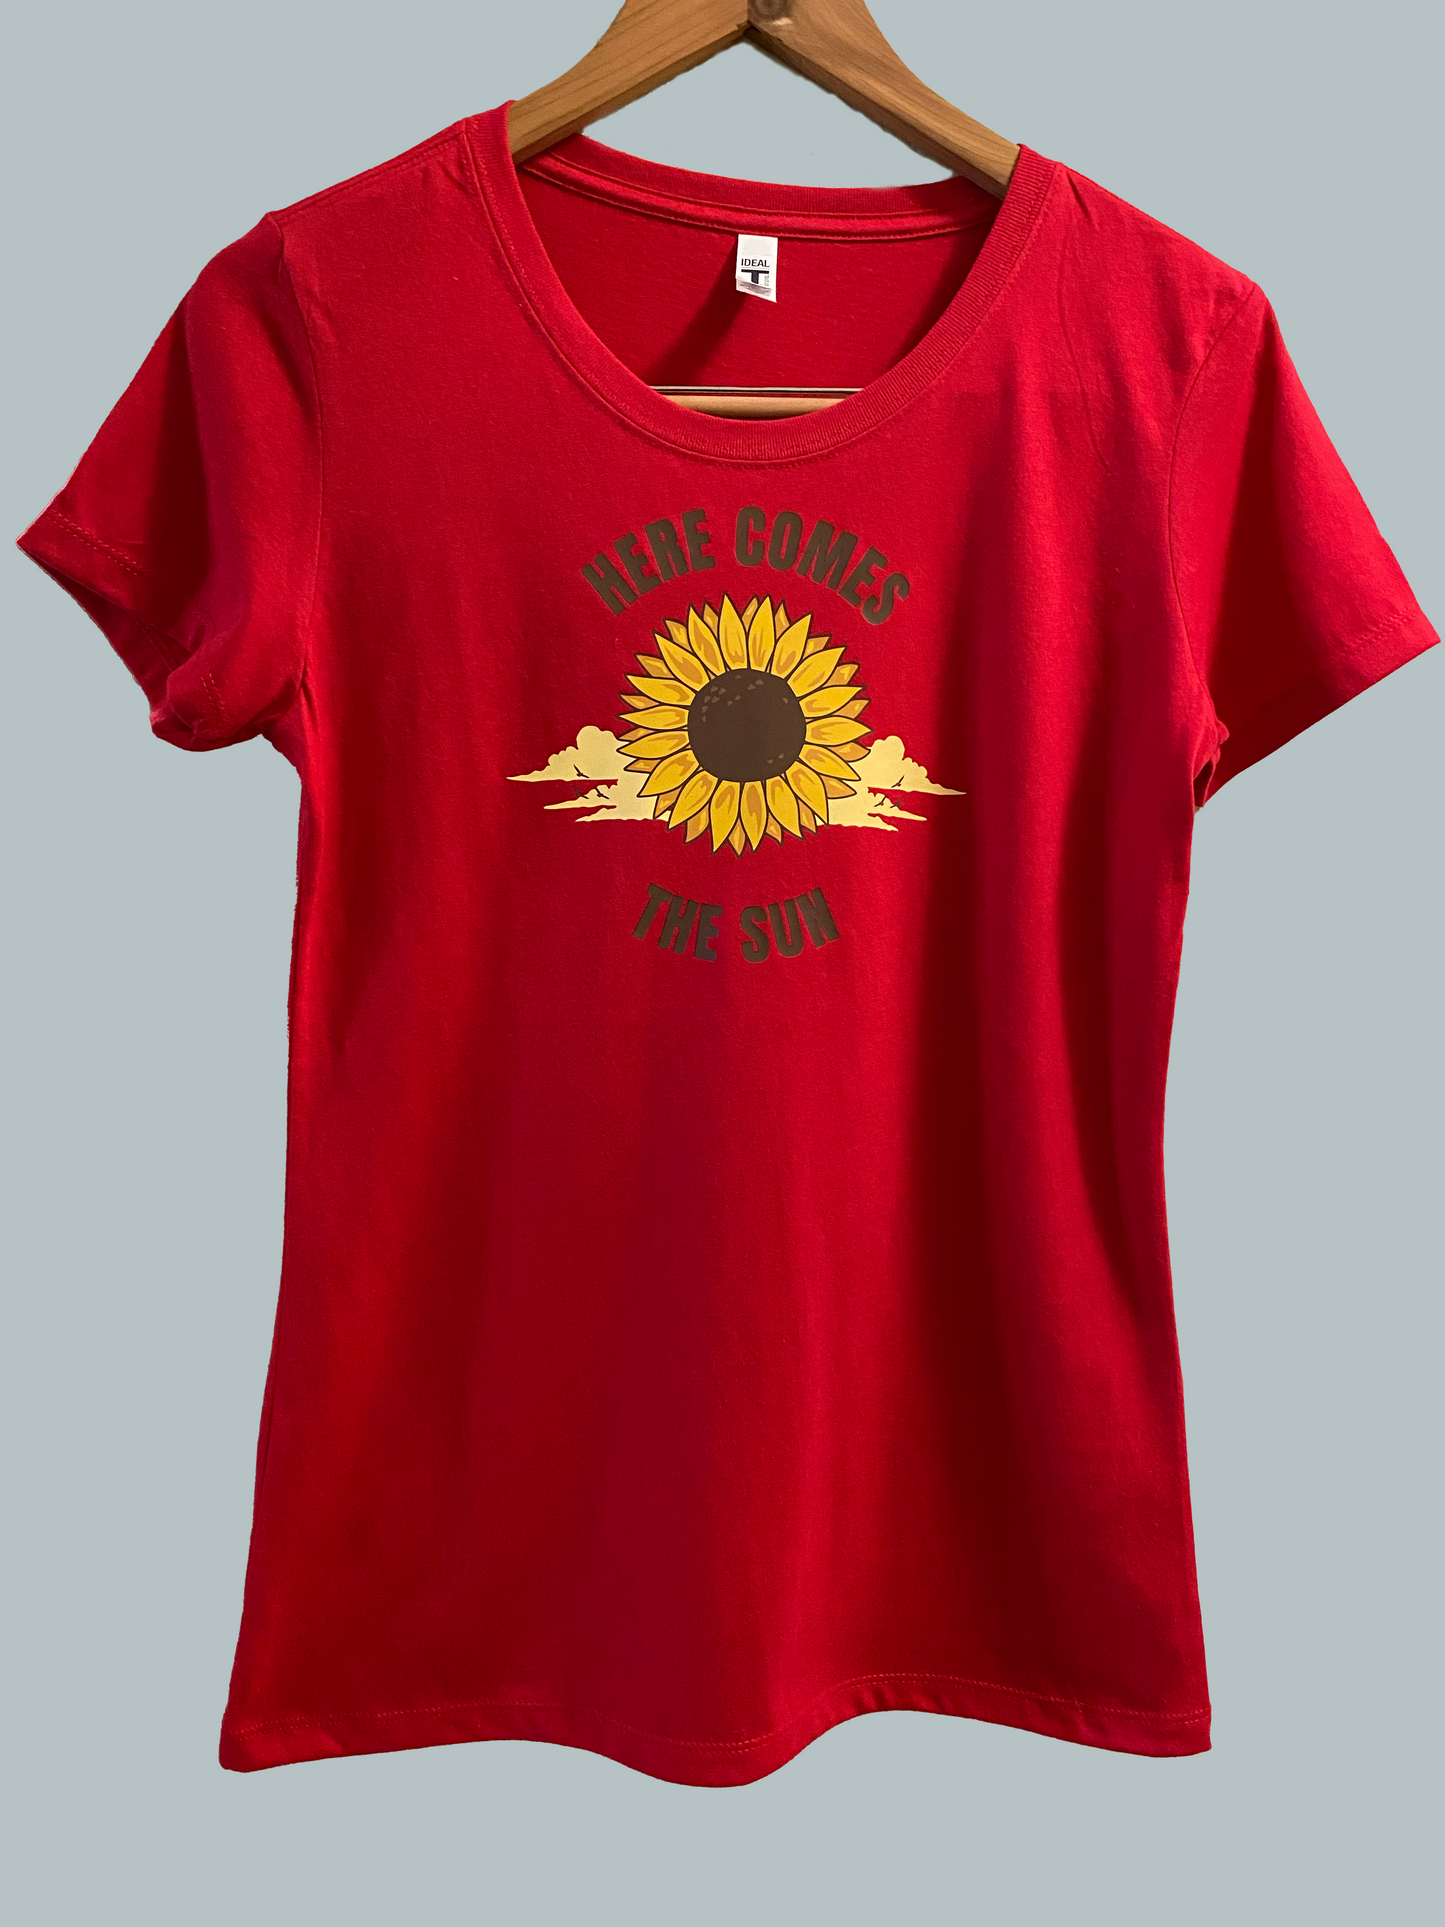 Here Comes The Sun written around a big sunflower that is rising out of the clouds on this red slightly fitted t-shirt Fabric 60% combed ringspun cotton/40% polyester lightweight jersey  Fabric laundered for reduced shrinkage 